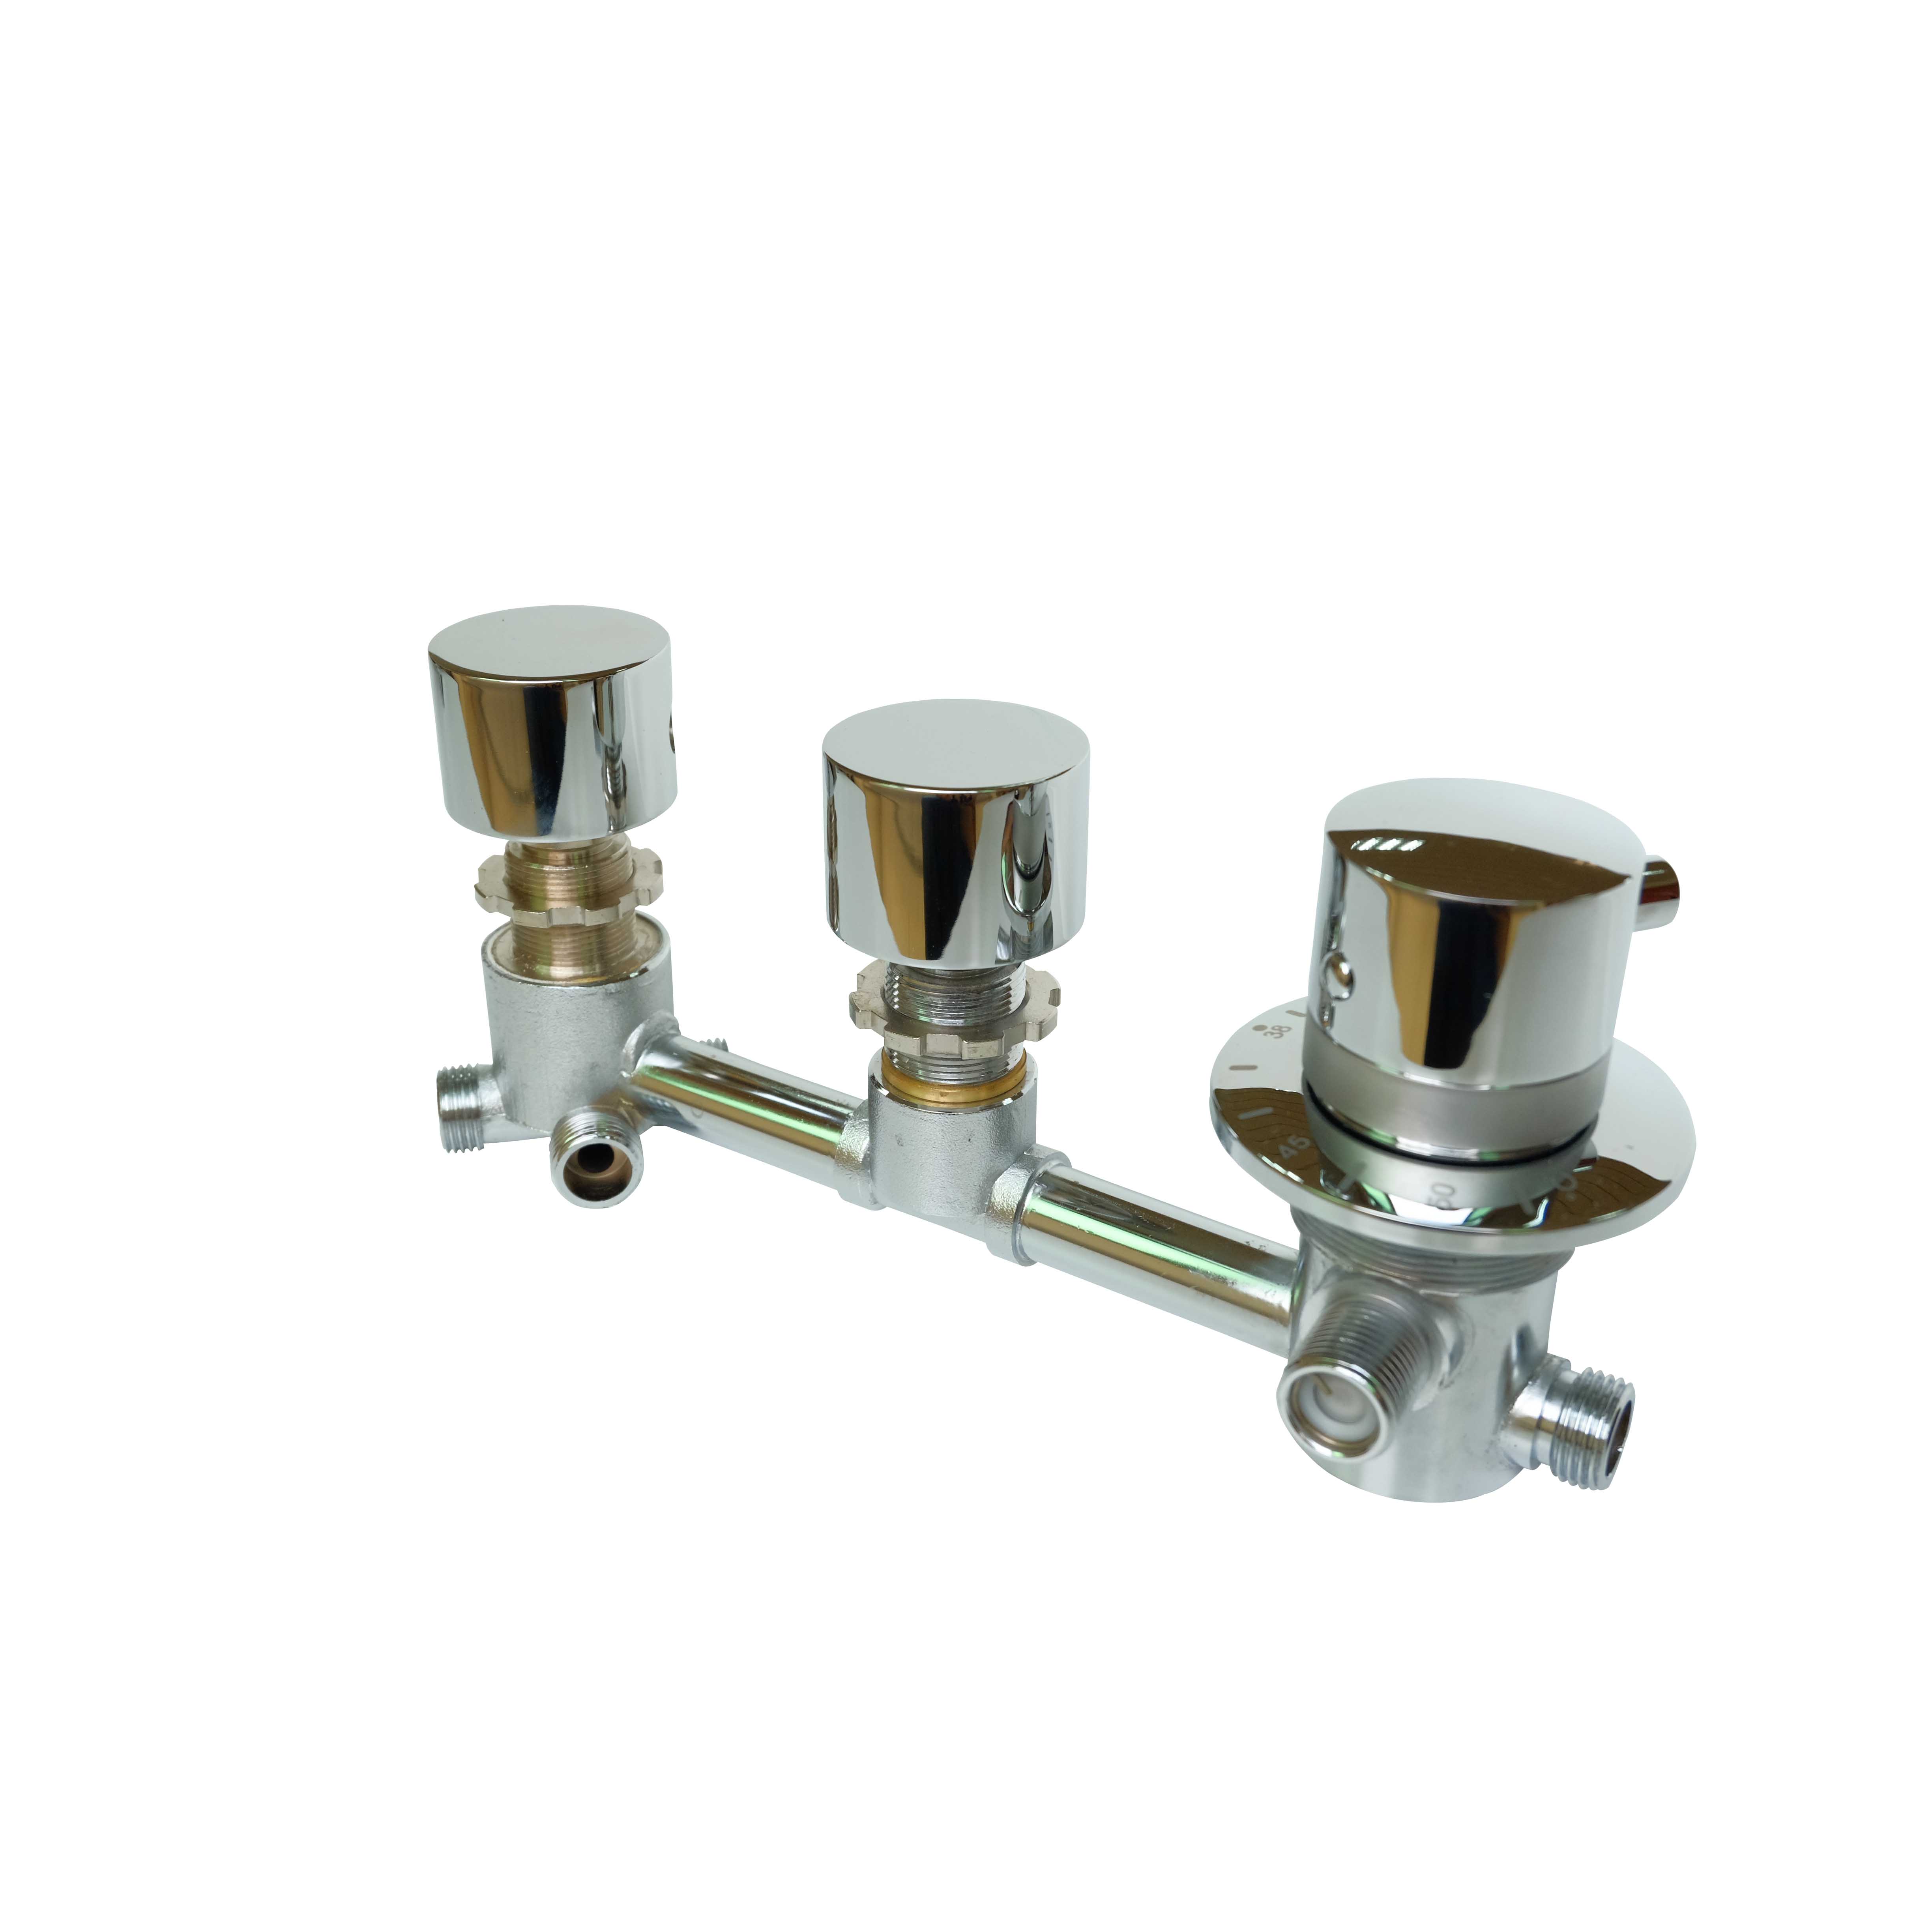 Thermostatic connected tfour function valve